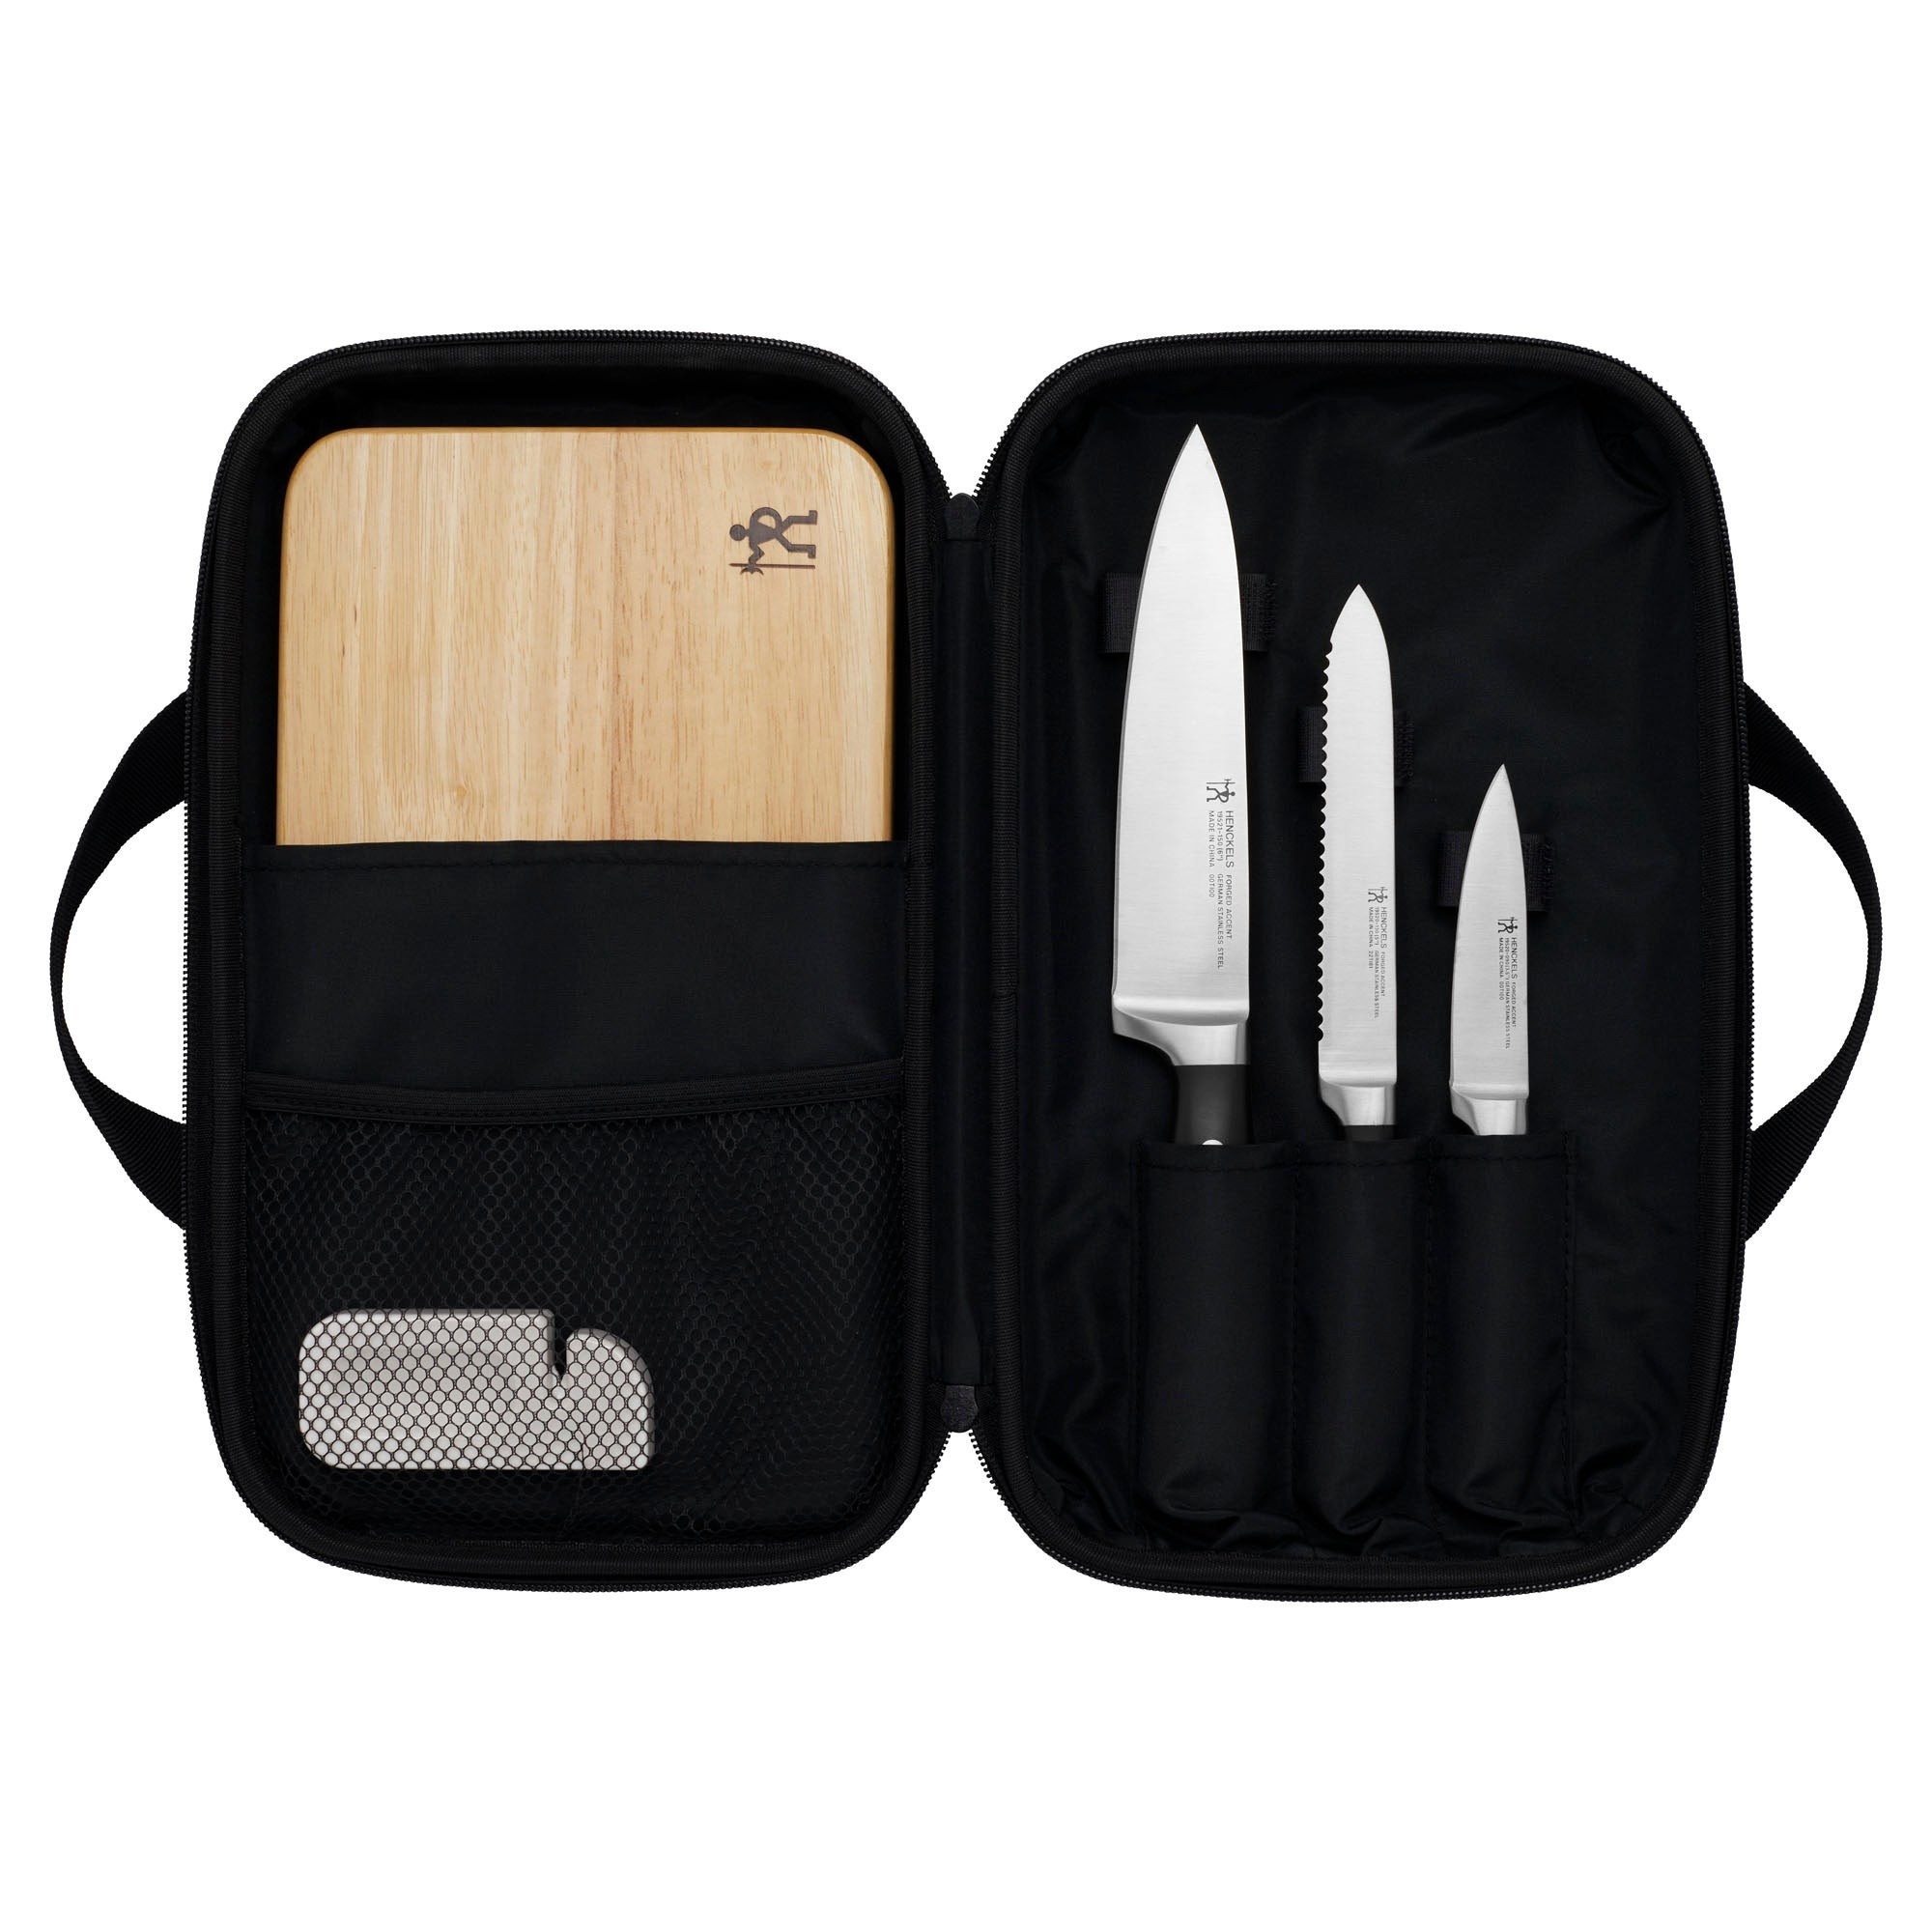 Accent 6pc Travel Knife Set